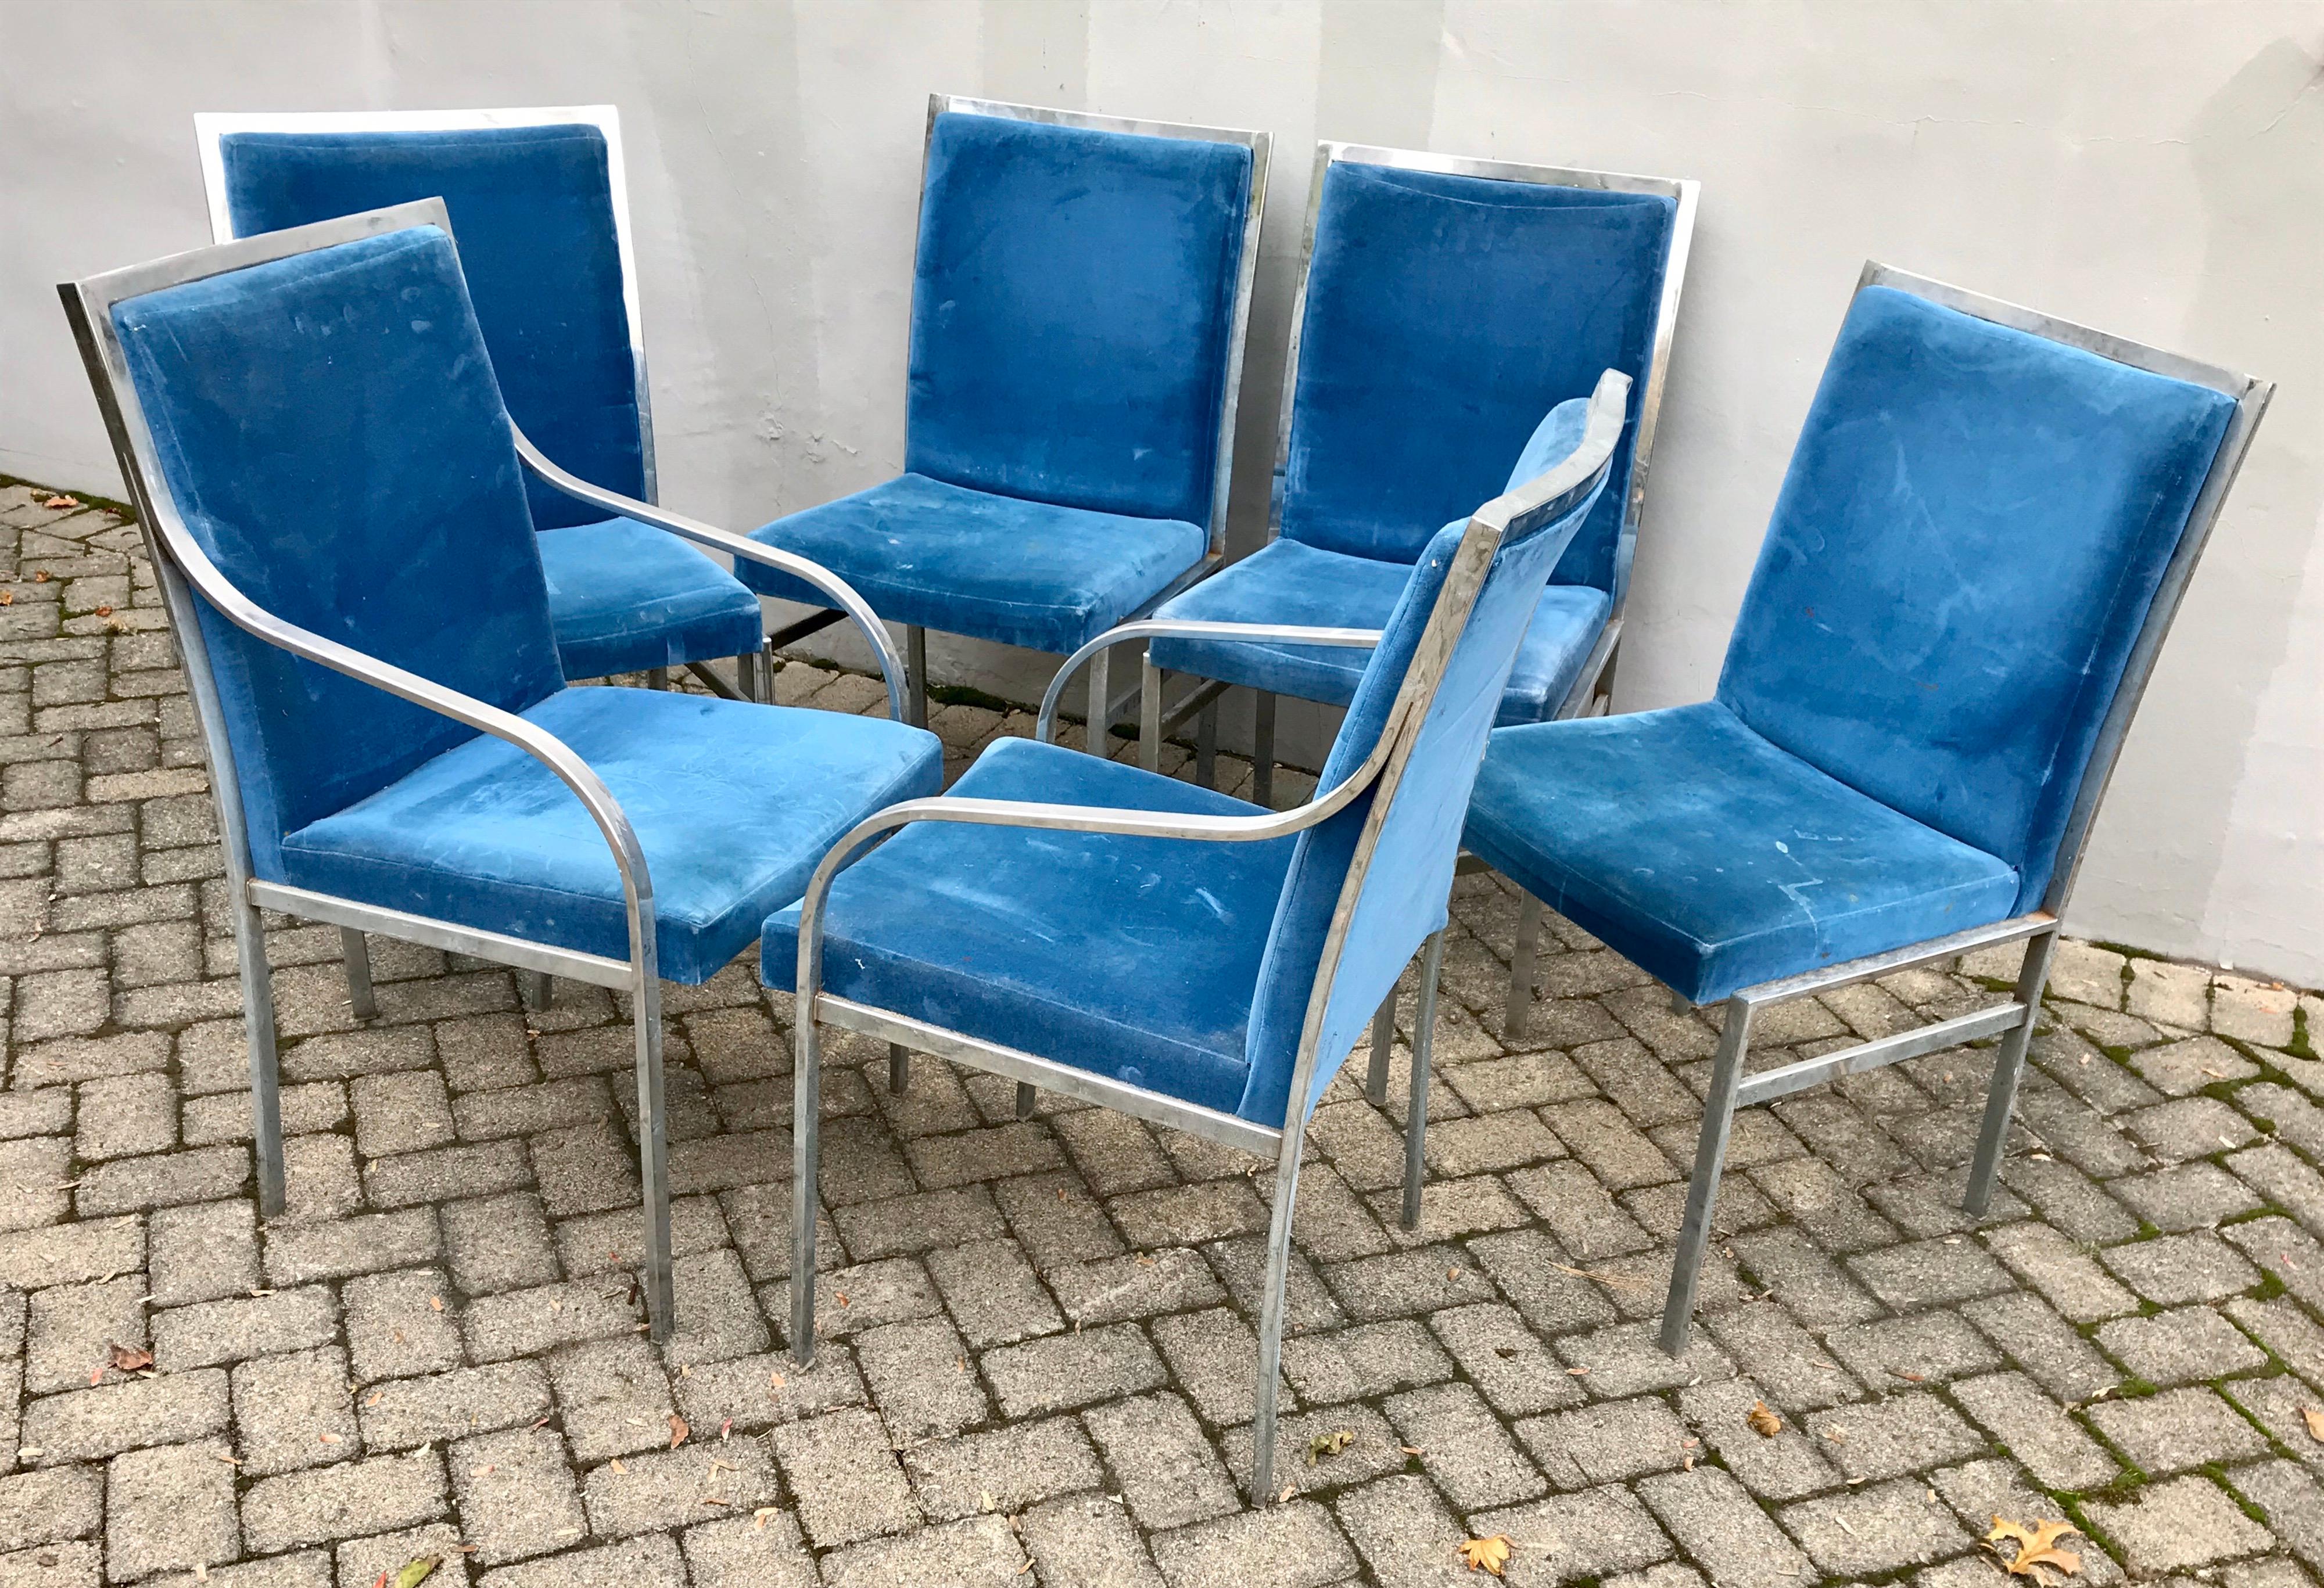 Set of six dining chairs designed by the French designer Pierre Cardin for Dillingham. The set includes two armchairs and four side chairs. Sleek mid century chrome frames with blue velvet upholstery. Two armchairs have curved arm design.

Pierre